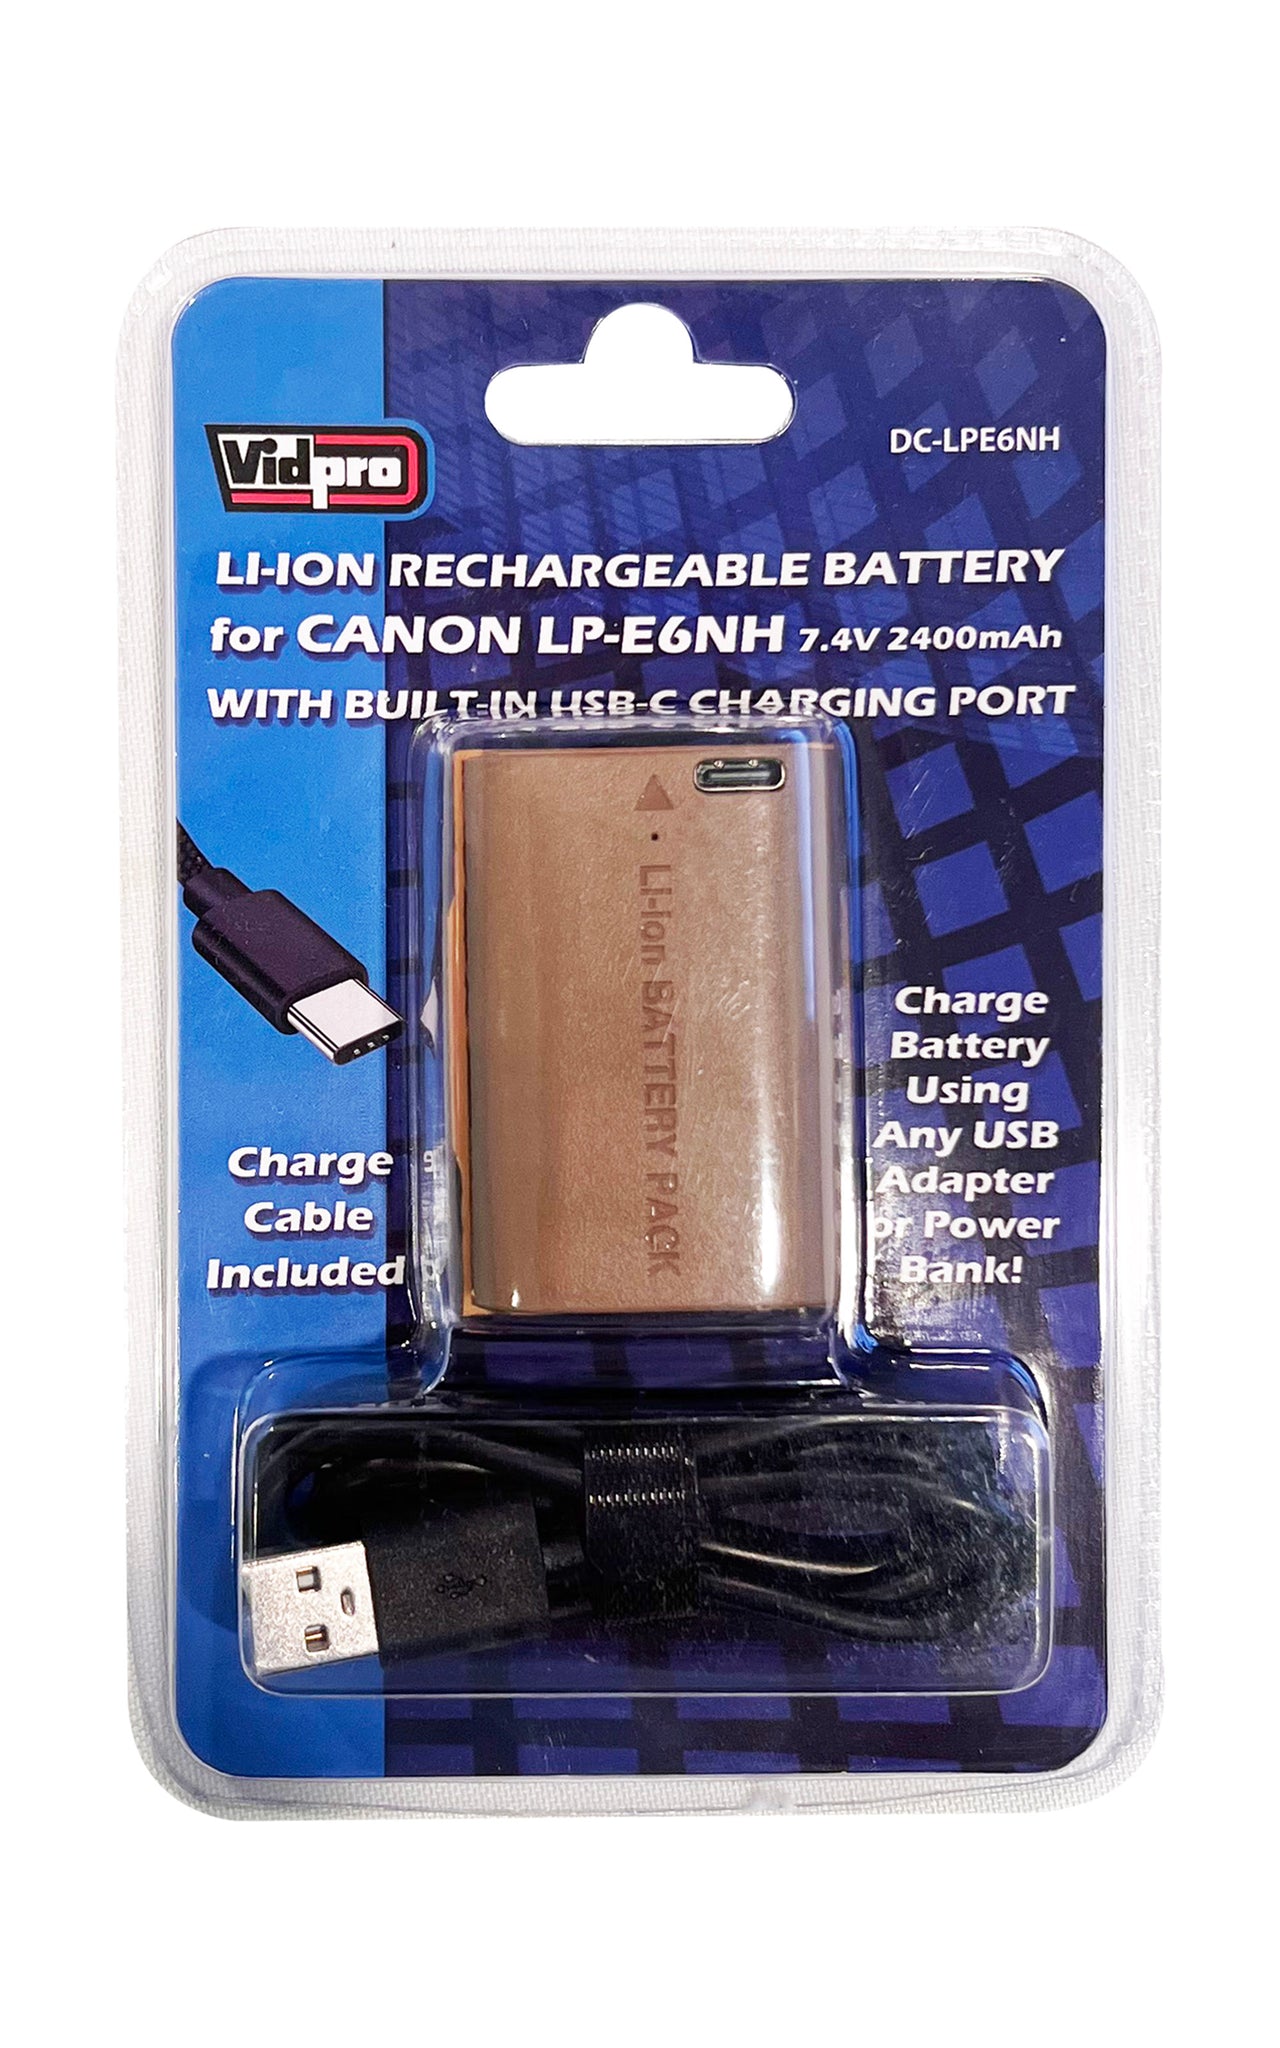 Vidpro DC-LPE6NH Battery with Built-In USB Charging for Canon LP-E6NH